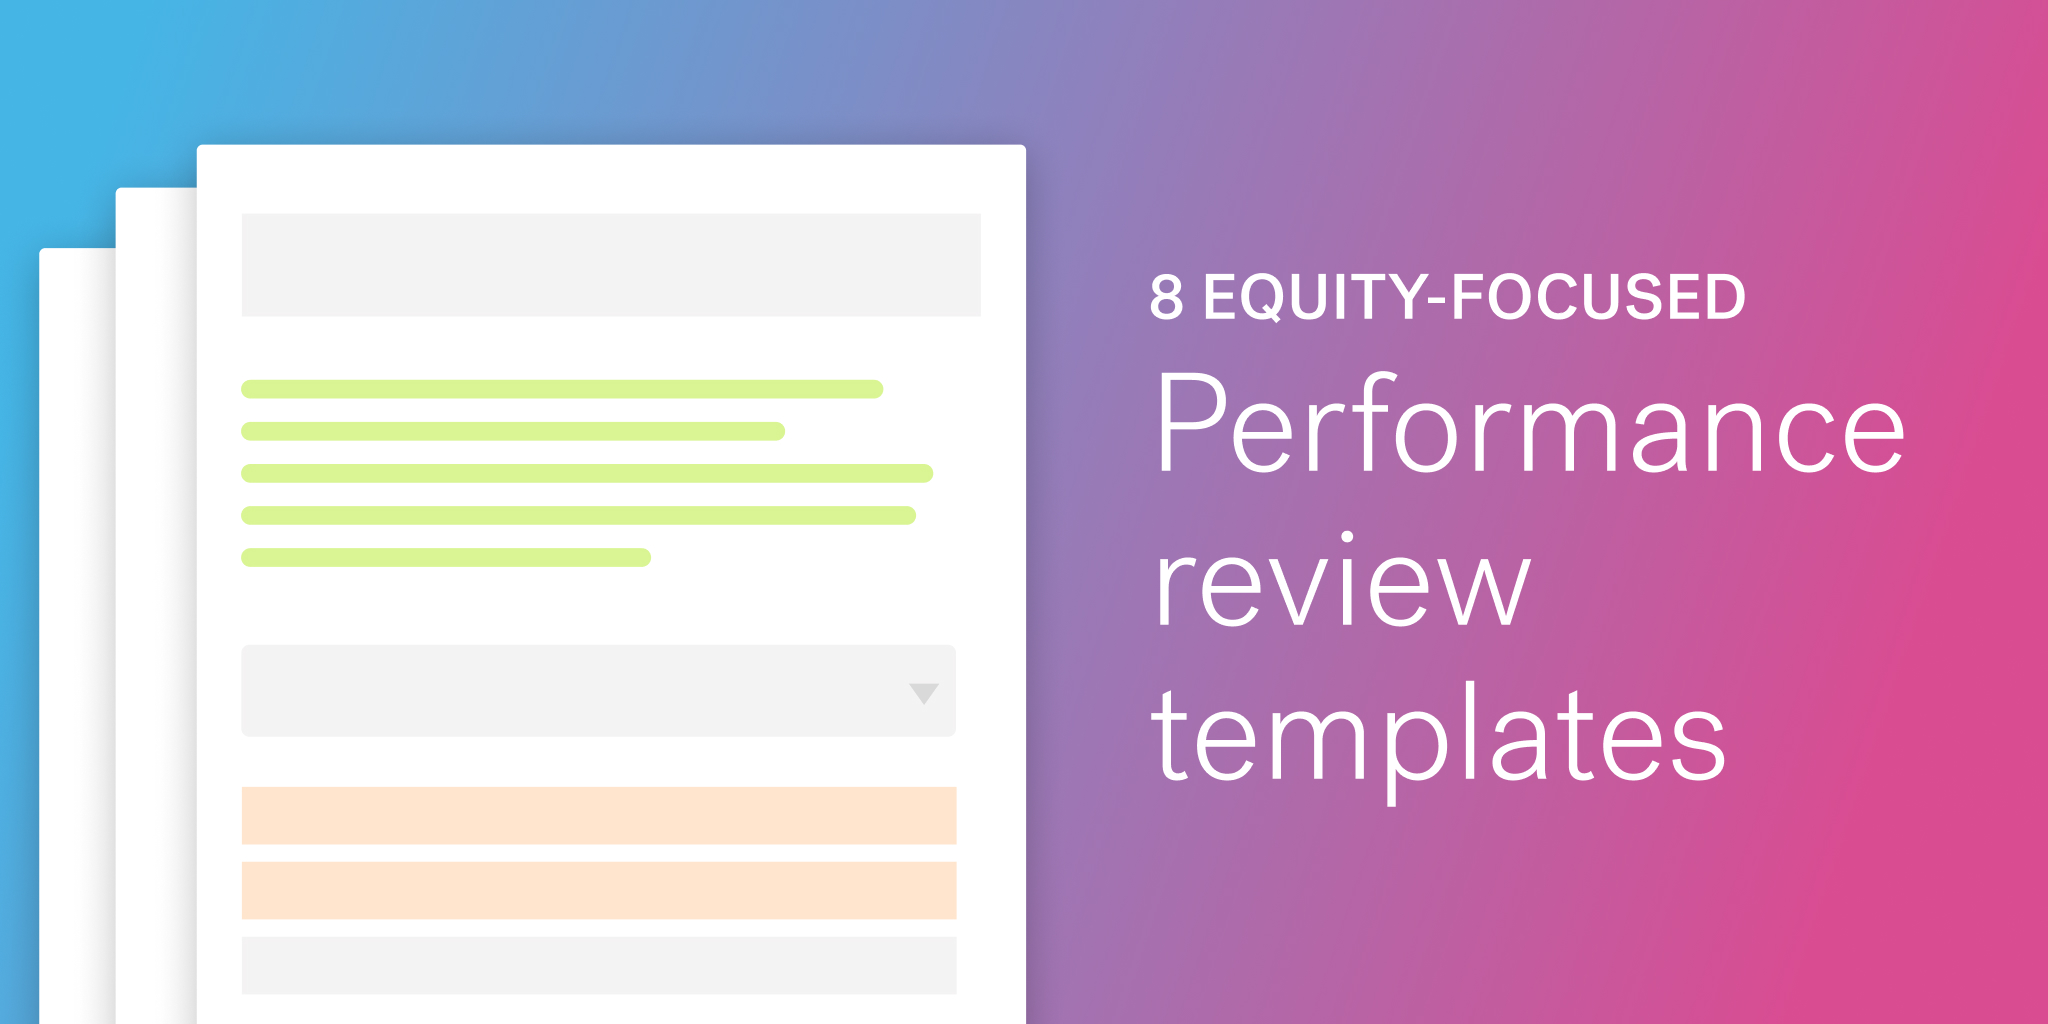 Graphic on blue and magenta gradient background with illustration of 3 performance review templates and title: 8 equity-focused performance review templates